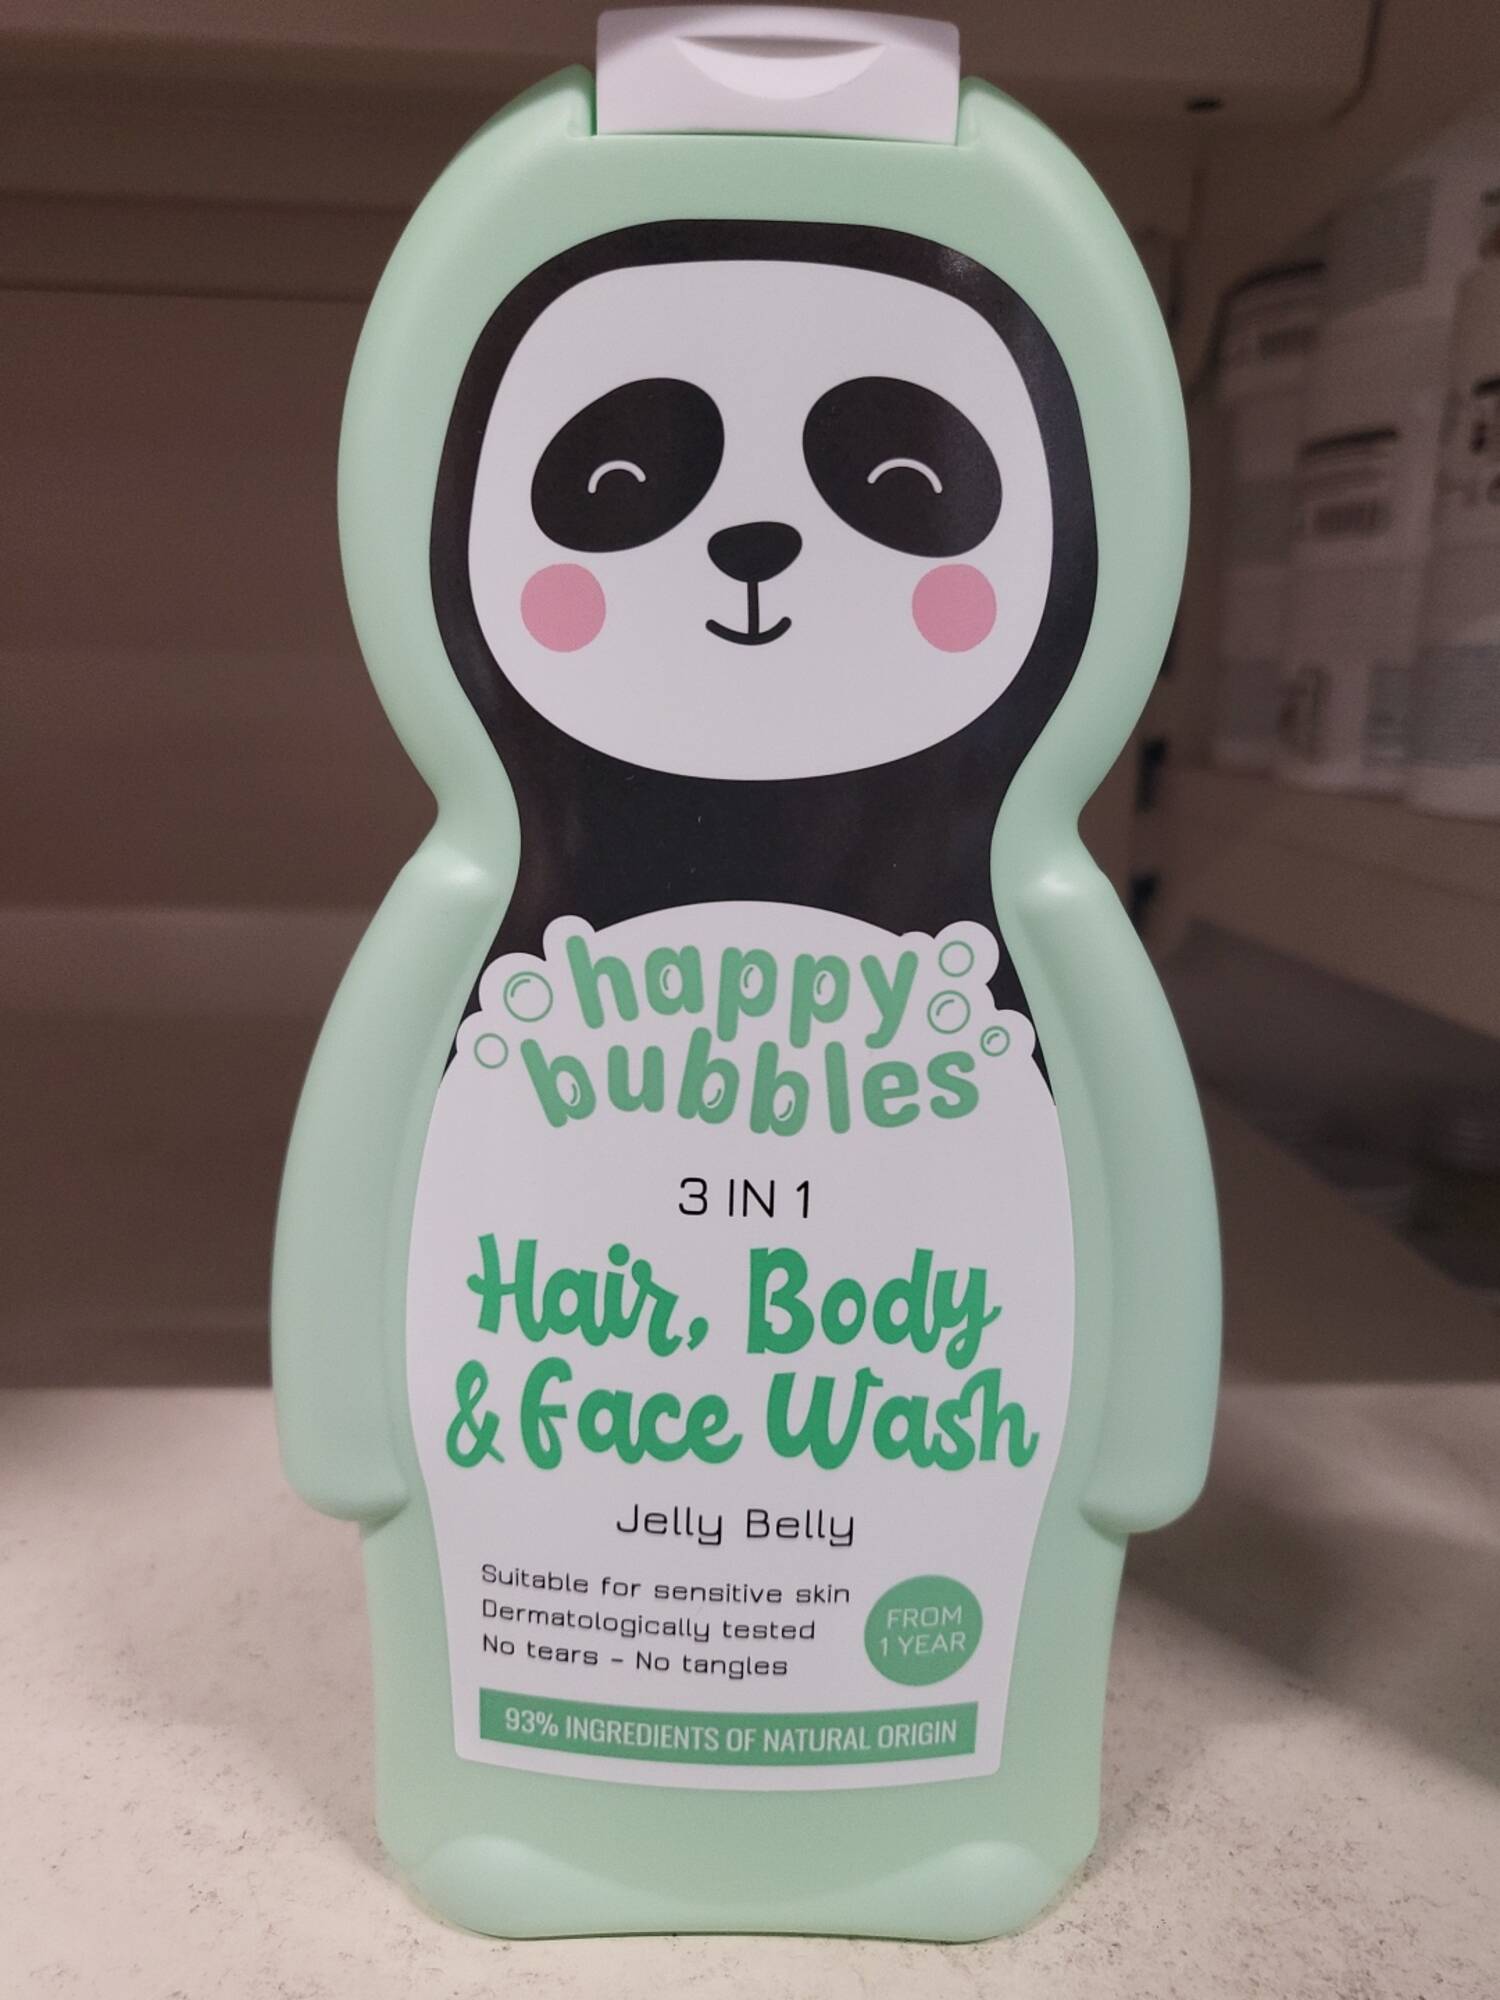 HAPPY BUBBLES - 3 in 1 Hair, Body & Face Wash Jelly Belly